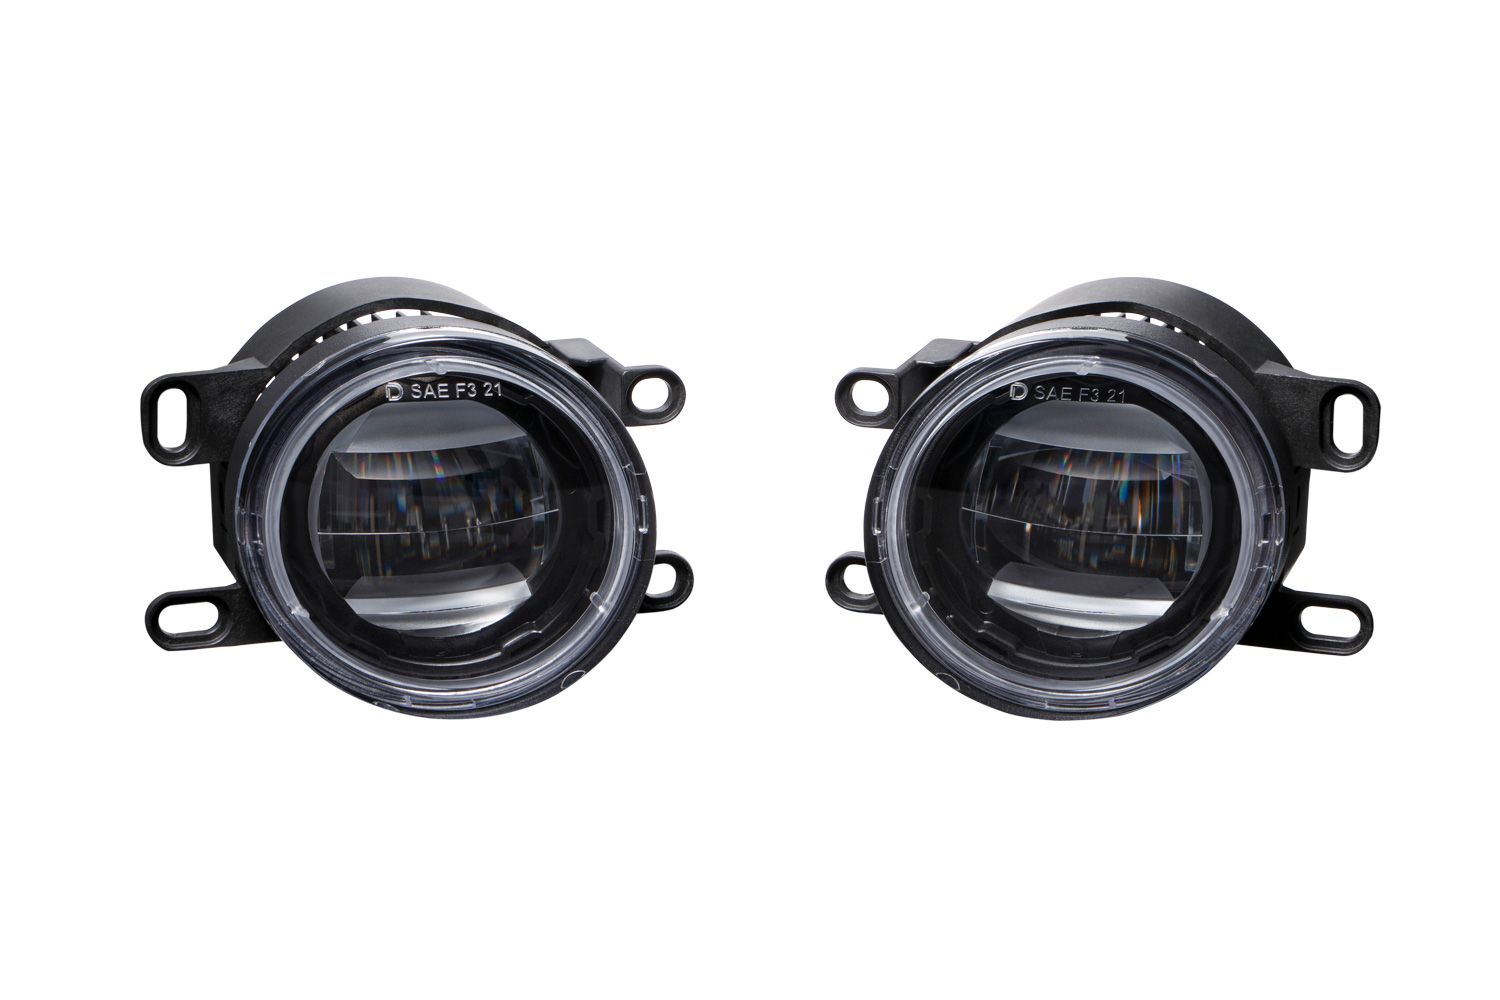 How to Install Elite Series Type CGX LED Fog Lights